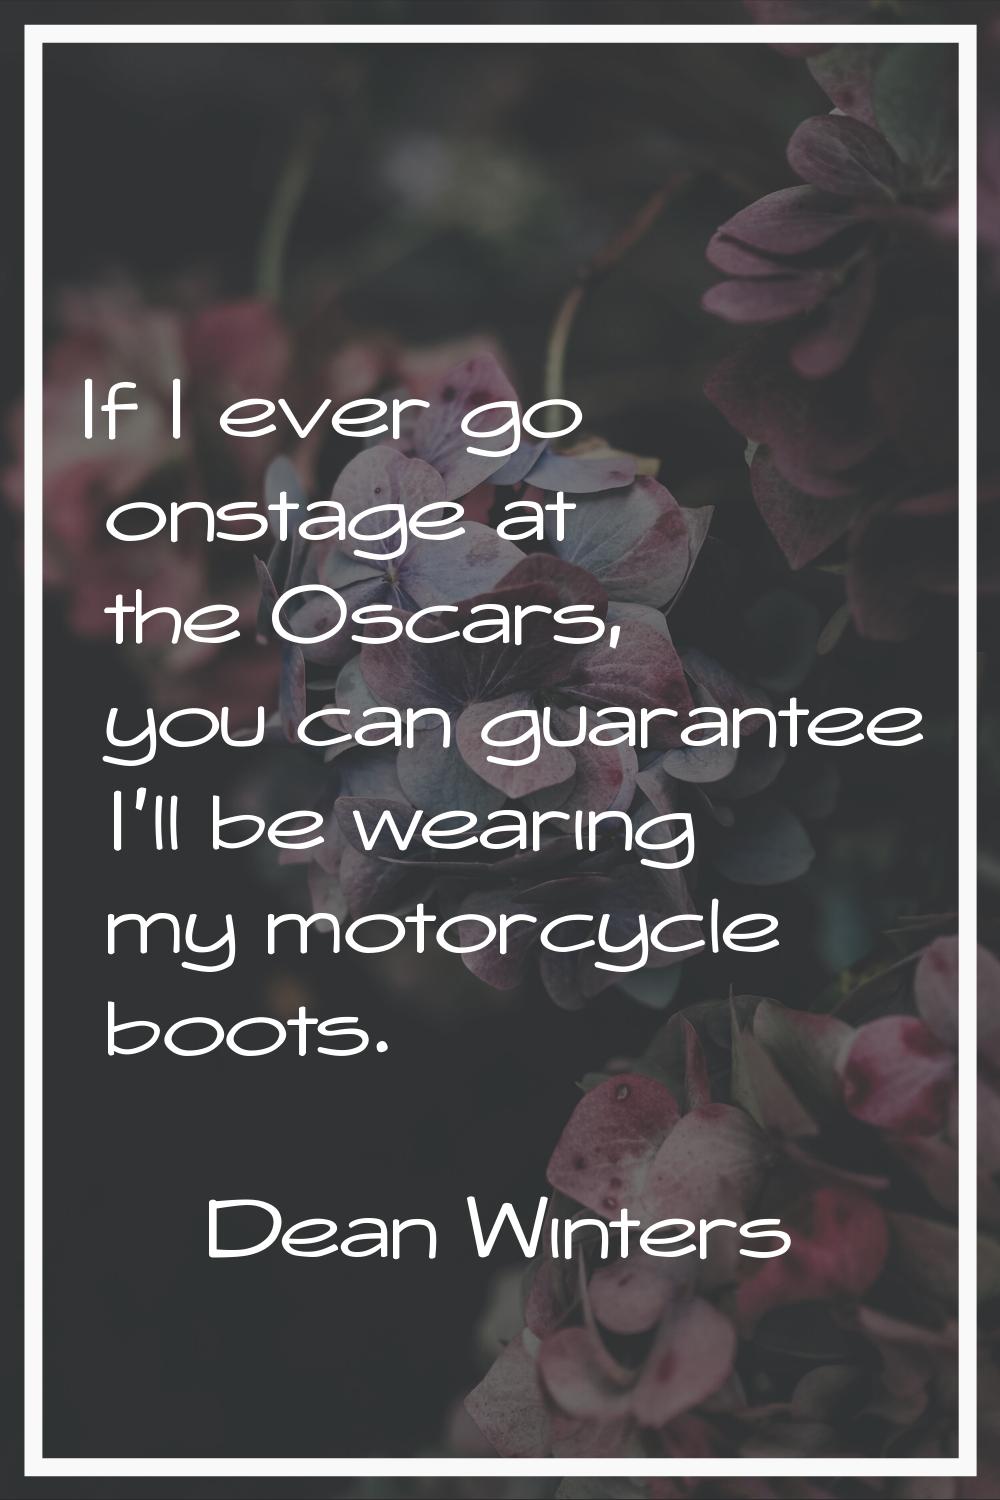 If I ever go onstage at the Oscars, you can guarantee I'll be wearing my motorcycle boots.